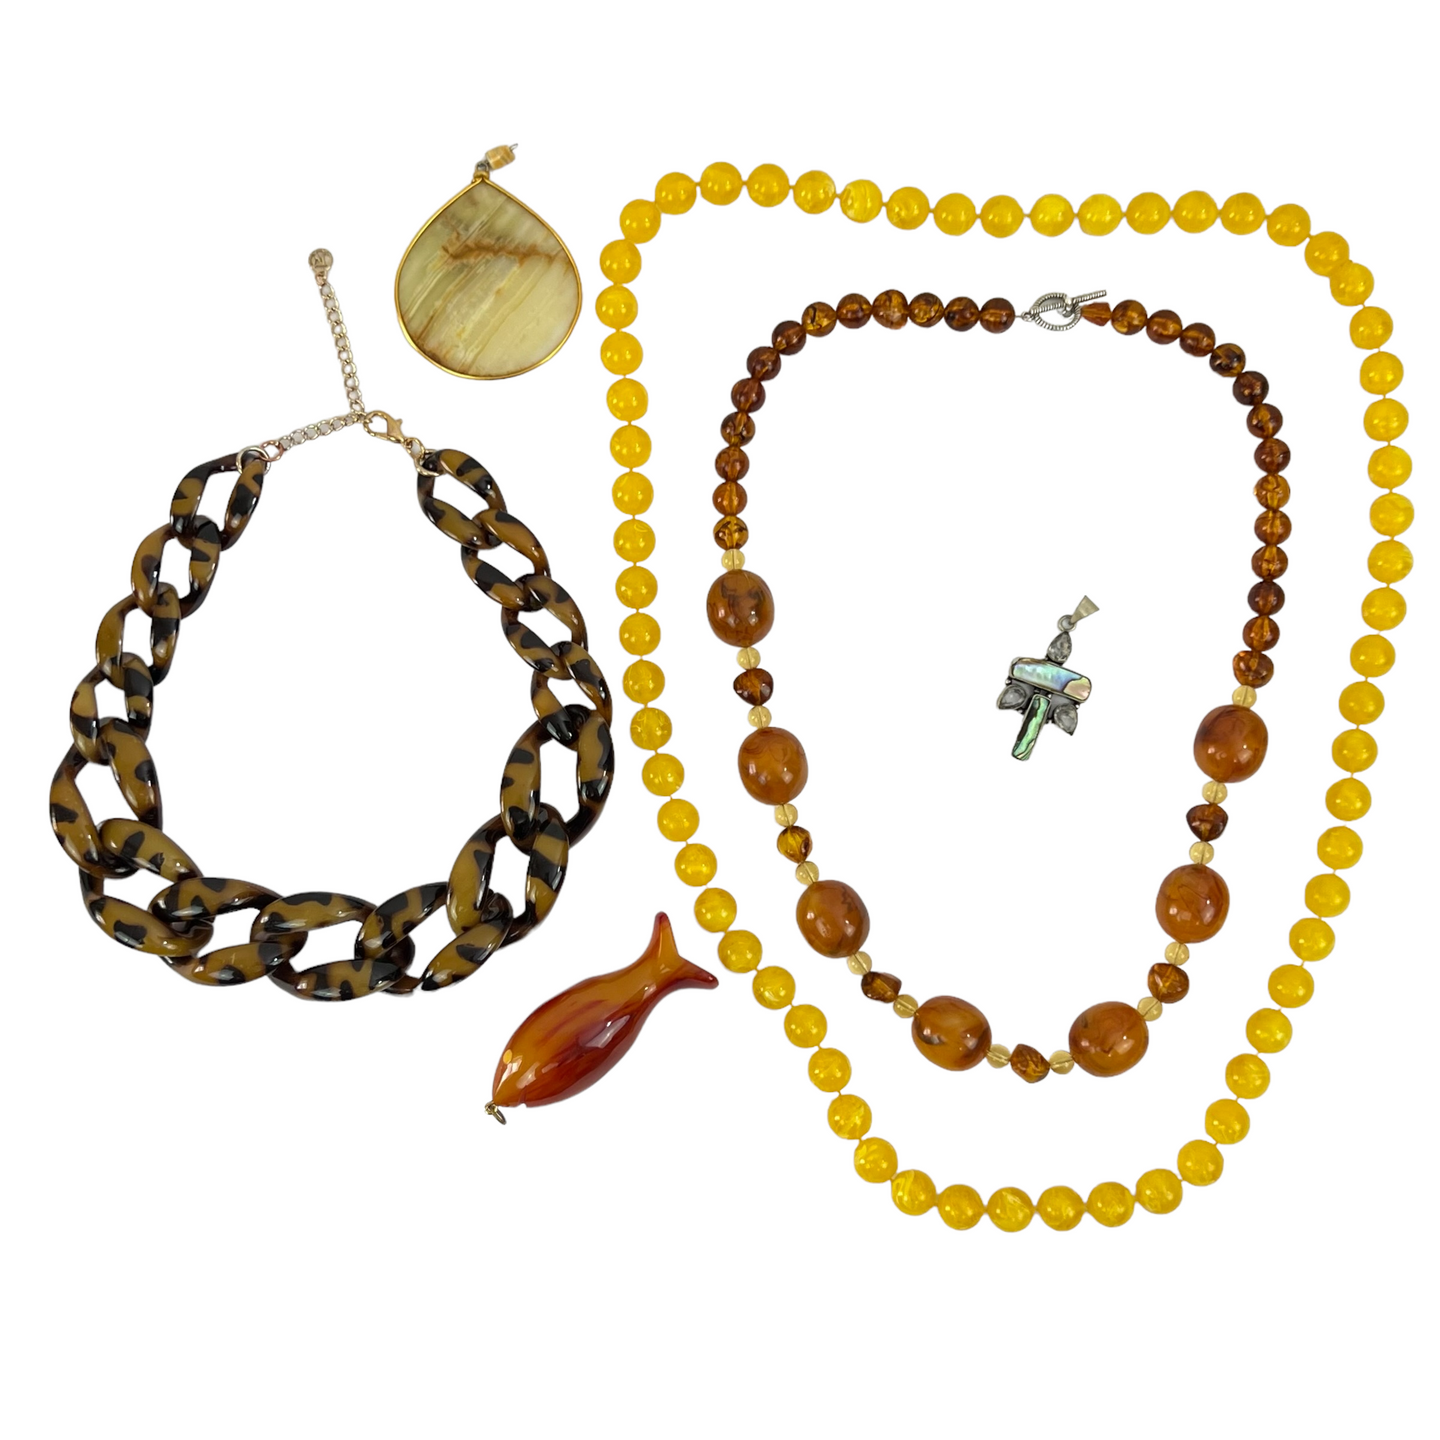 Chunky Boho Jewelry. This curated lot of jewelry includes 2 vintage beaded necklaces, 1 contemporary faux tortoiseshell necklace, one amber colored fish pendant, one teardrop shaped pendant and one shell inlay pendant with crystal or glass stones.